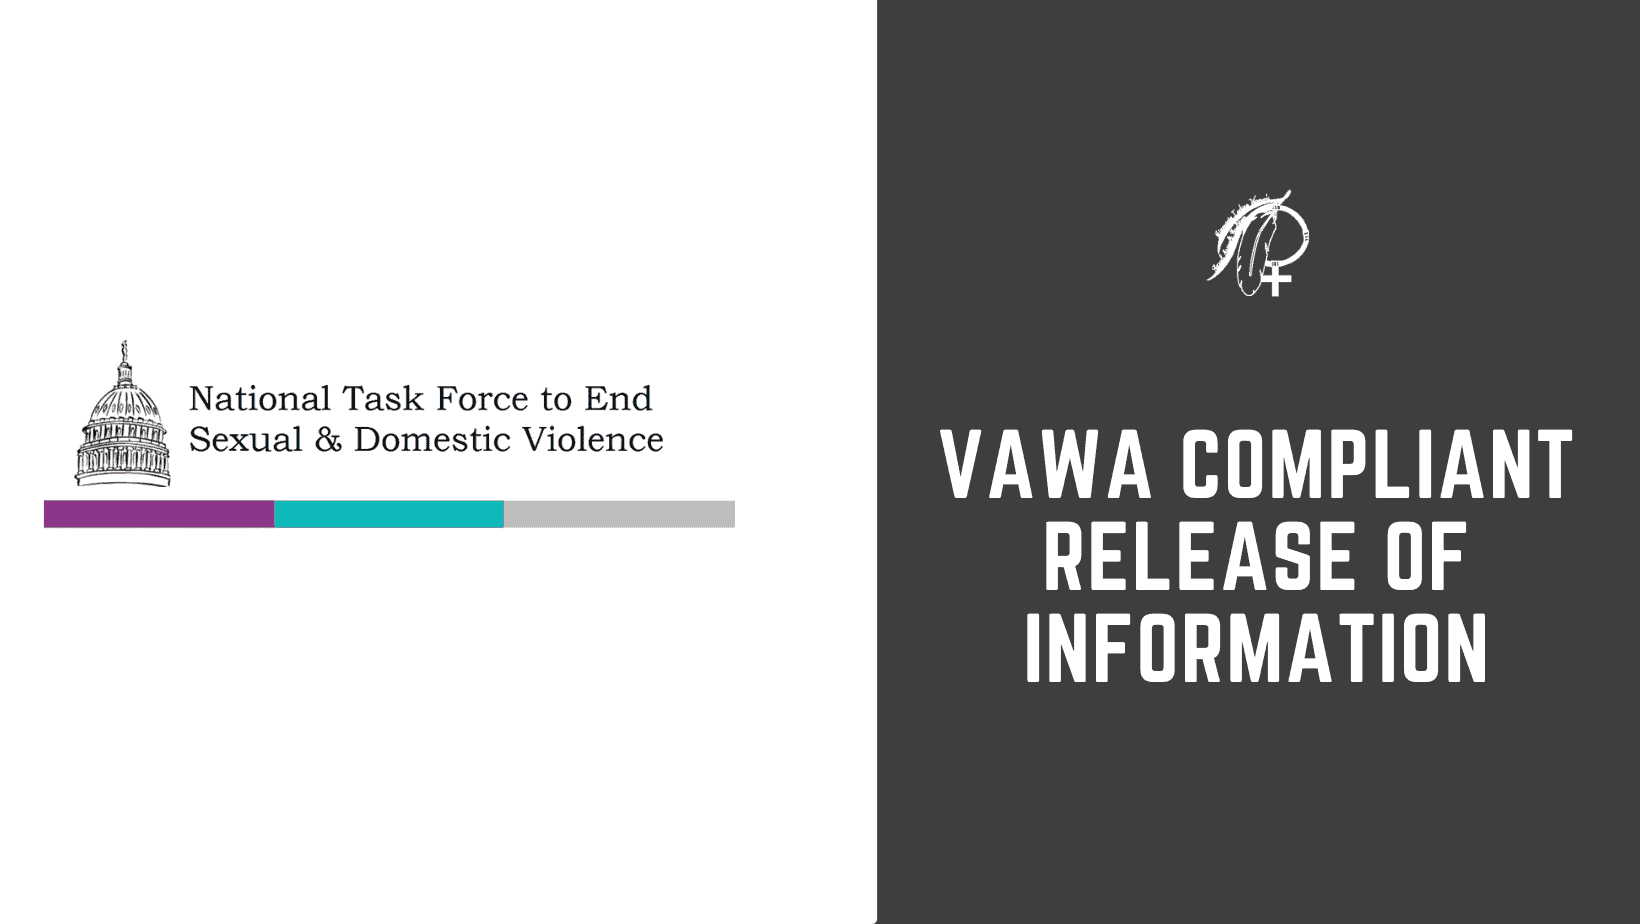 VAWA Compliant Release of Information